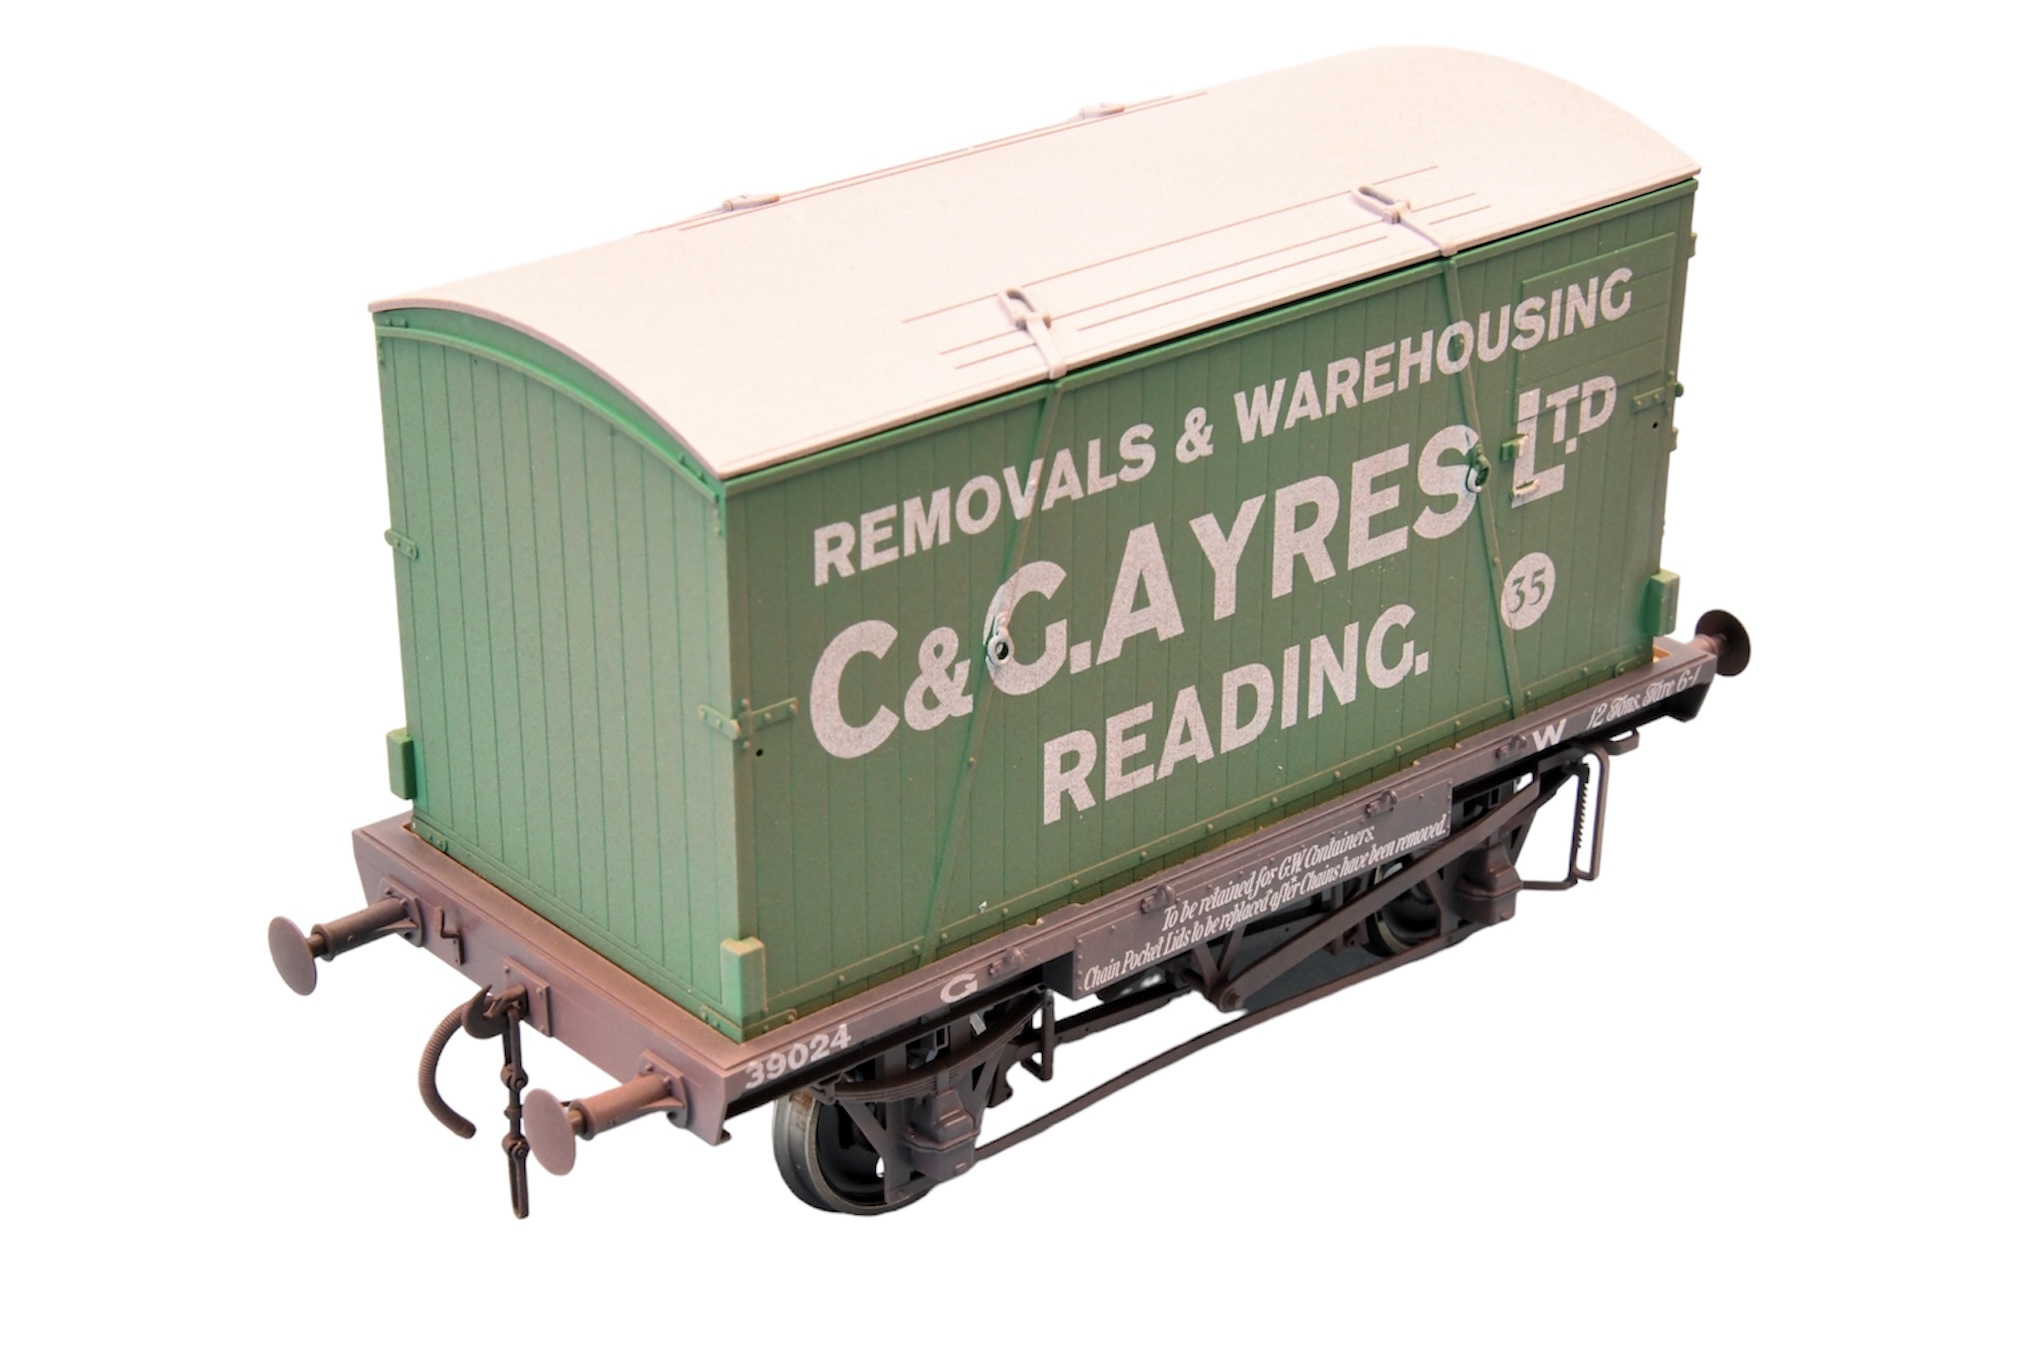 7F-037-012W CONFLAT & CONTAINER C & G AYRES 35 Weathered